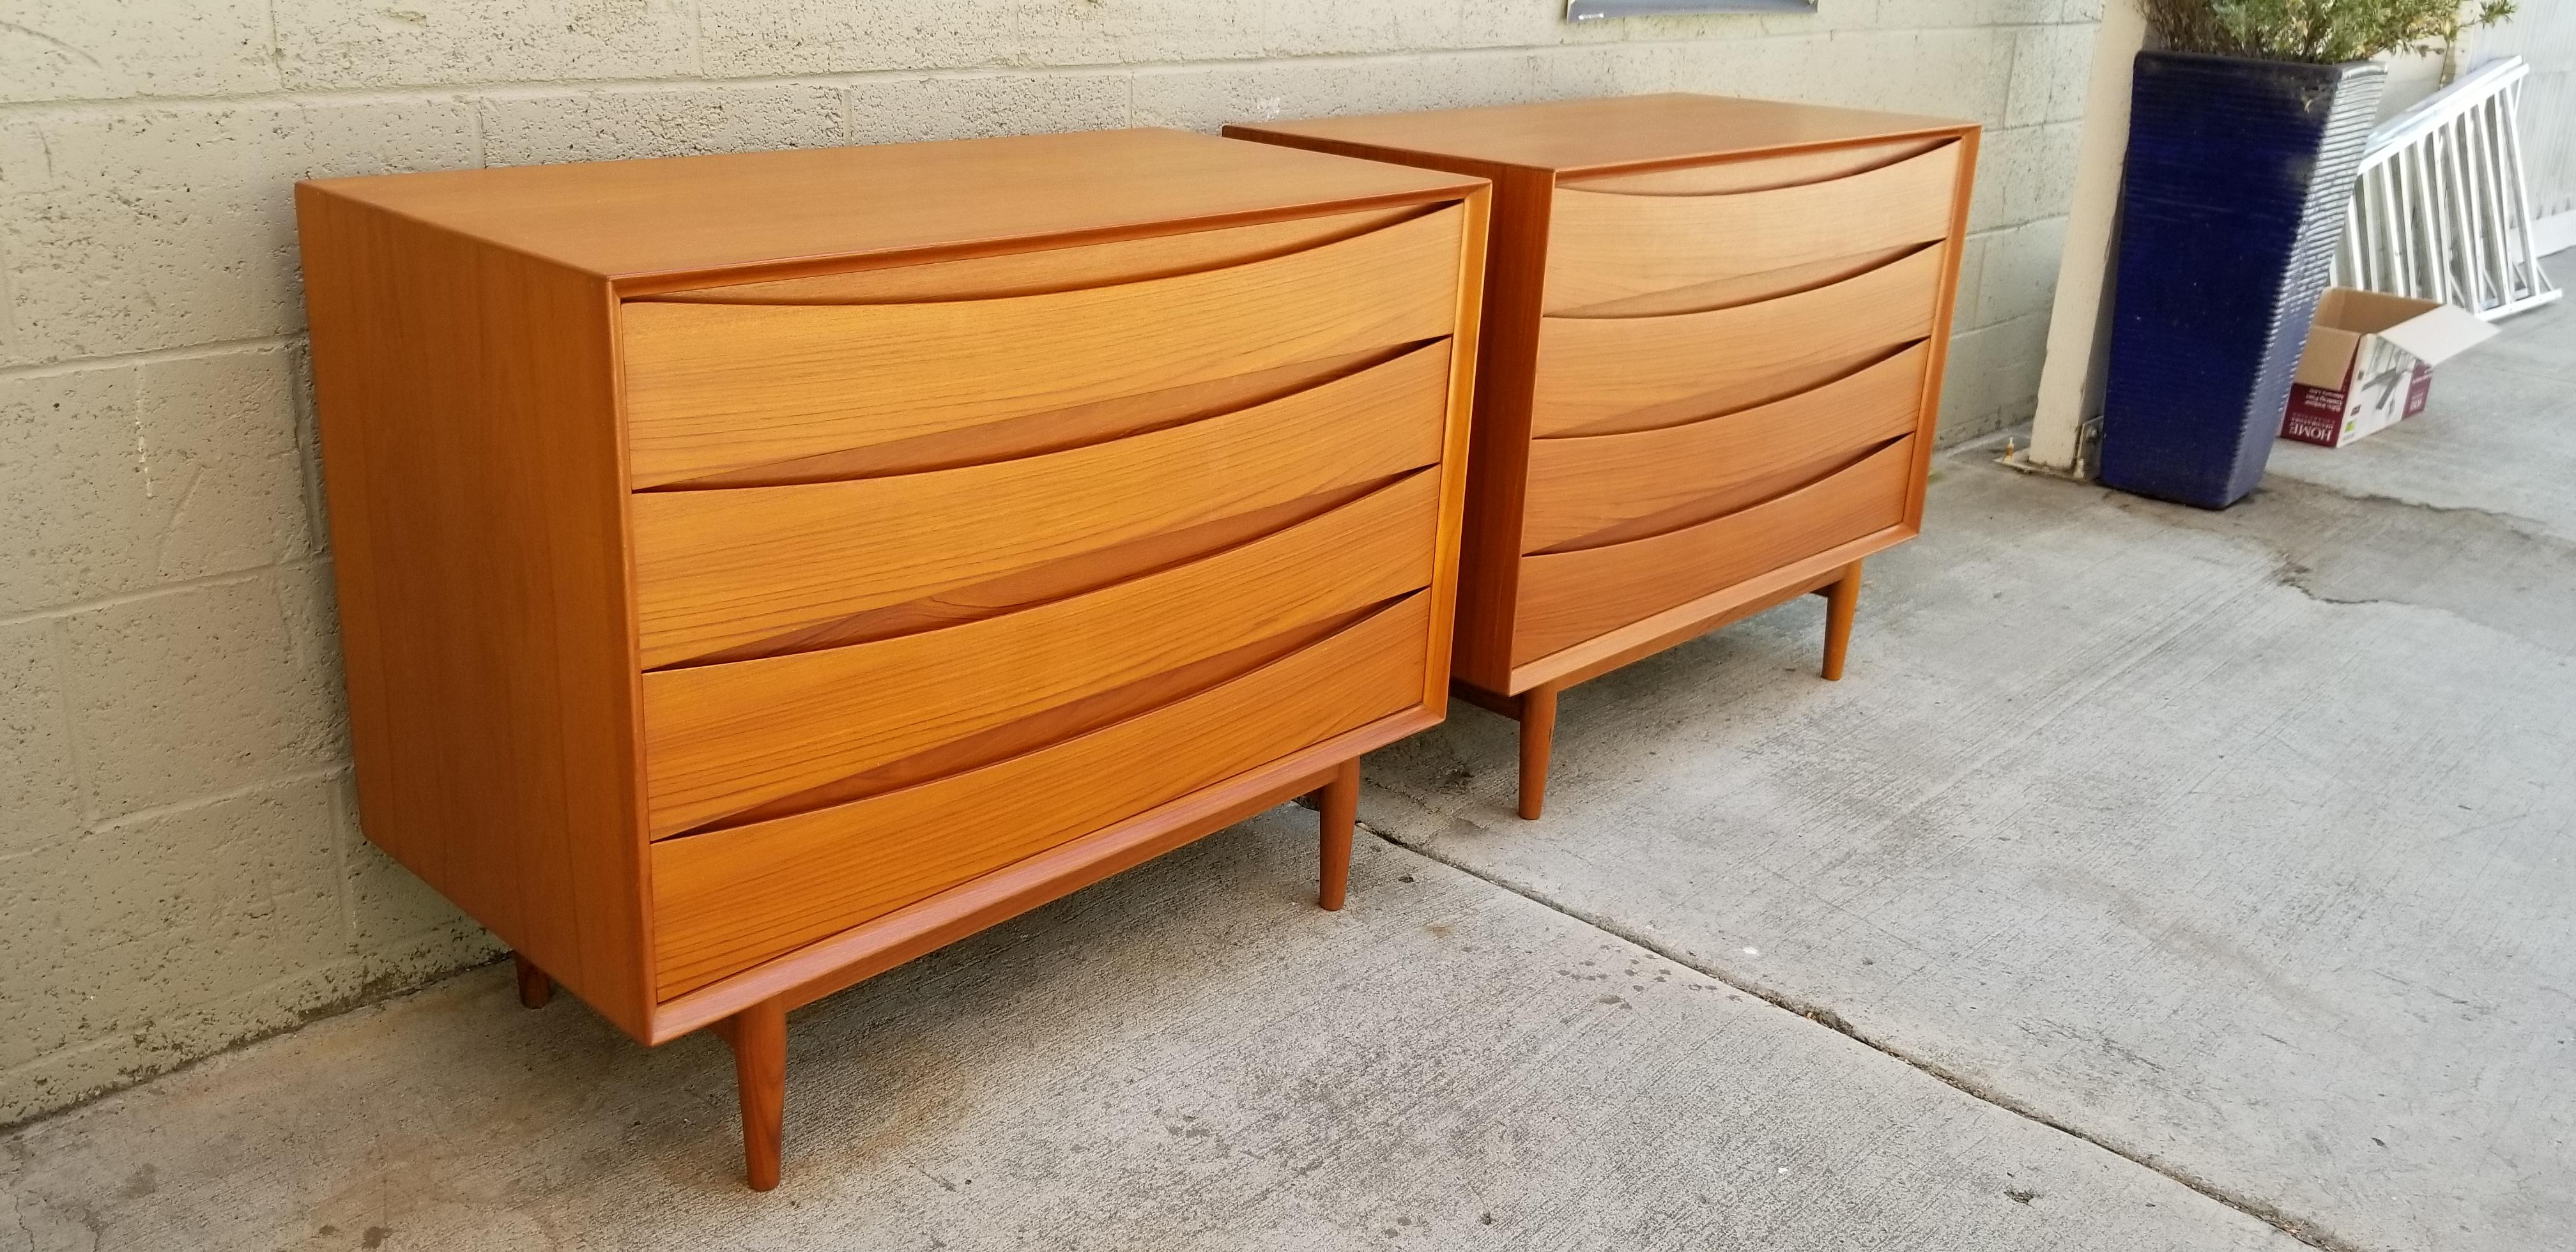 Exceptional matched pair of Danish modern teak dressers designed by Arne Vodder for Sibast. Denmark, circa 1960. Excellent original finish with rich patina. Solid teak drawer fronts. Fitted top drawer with sliding trinket or jewelry tray. All